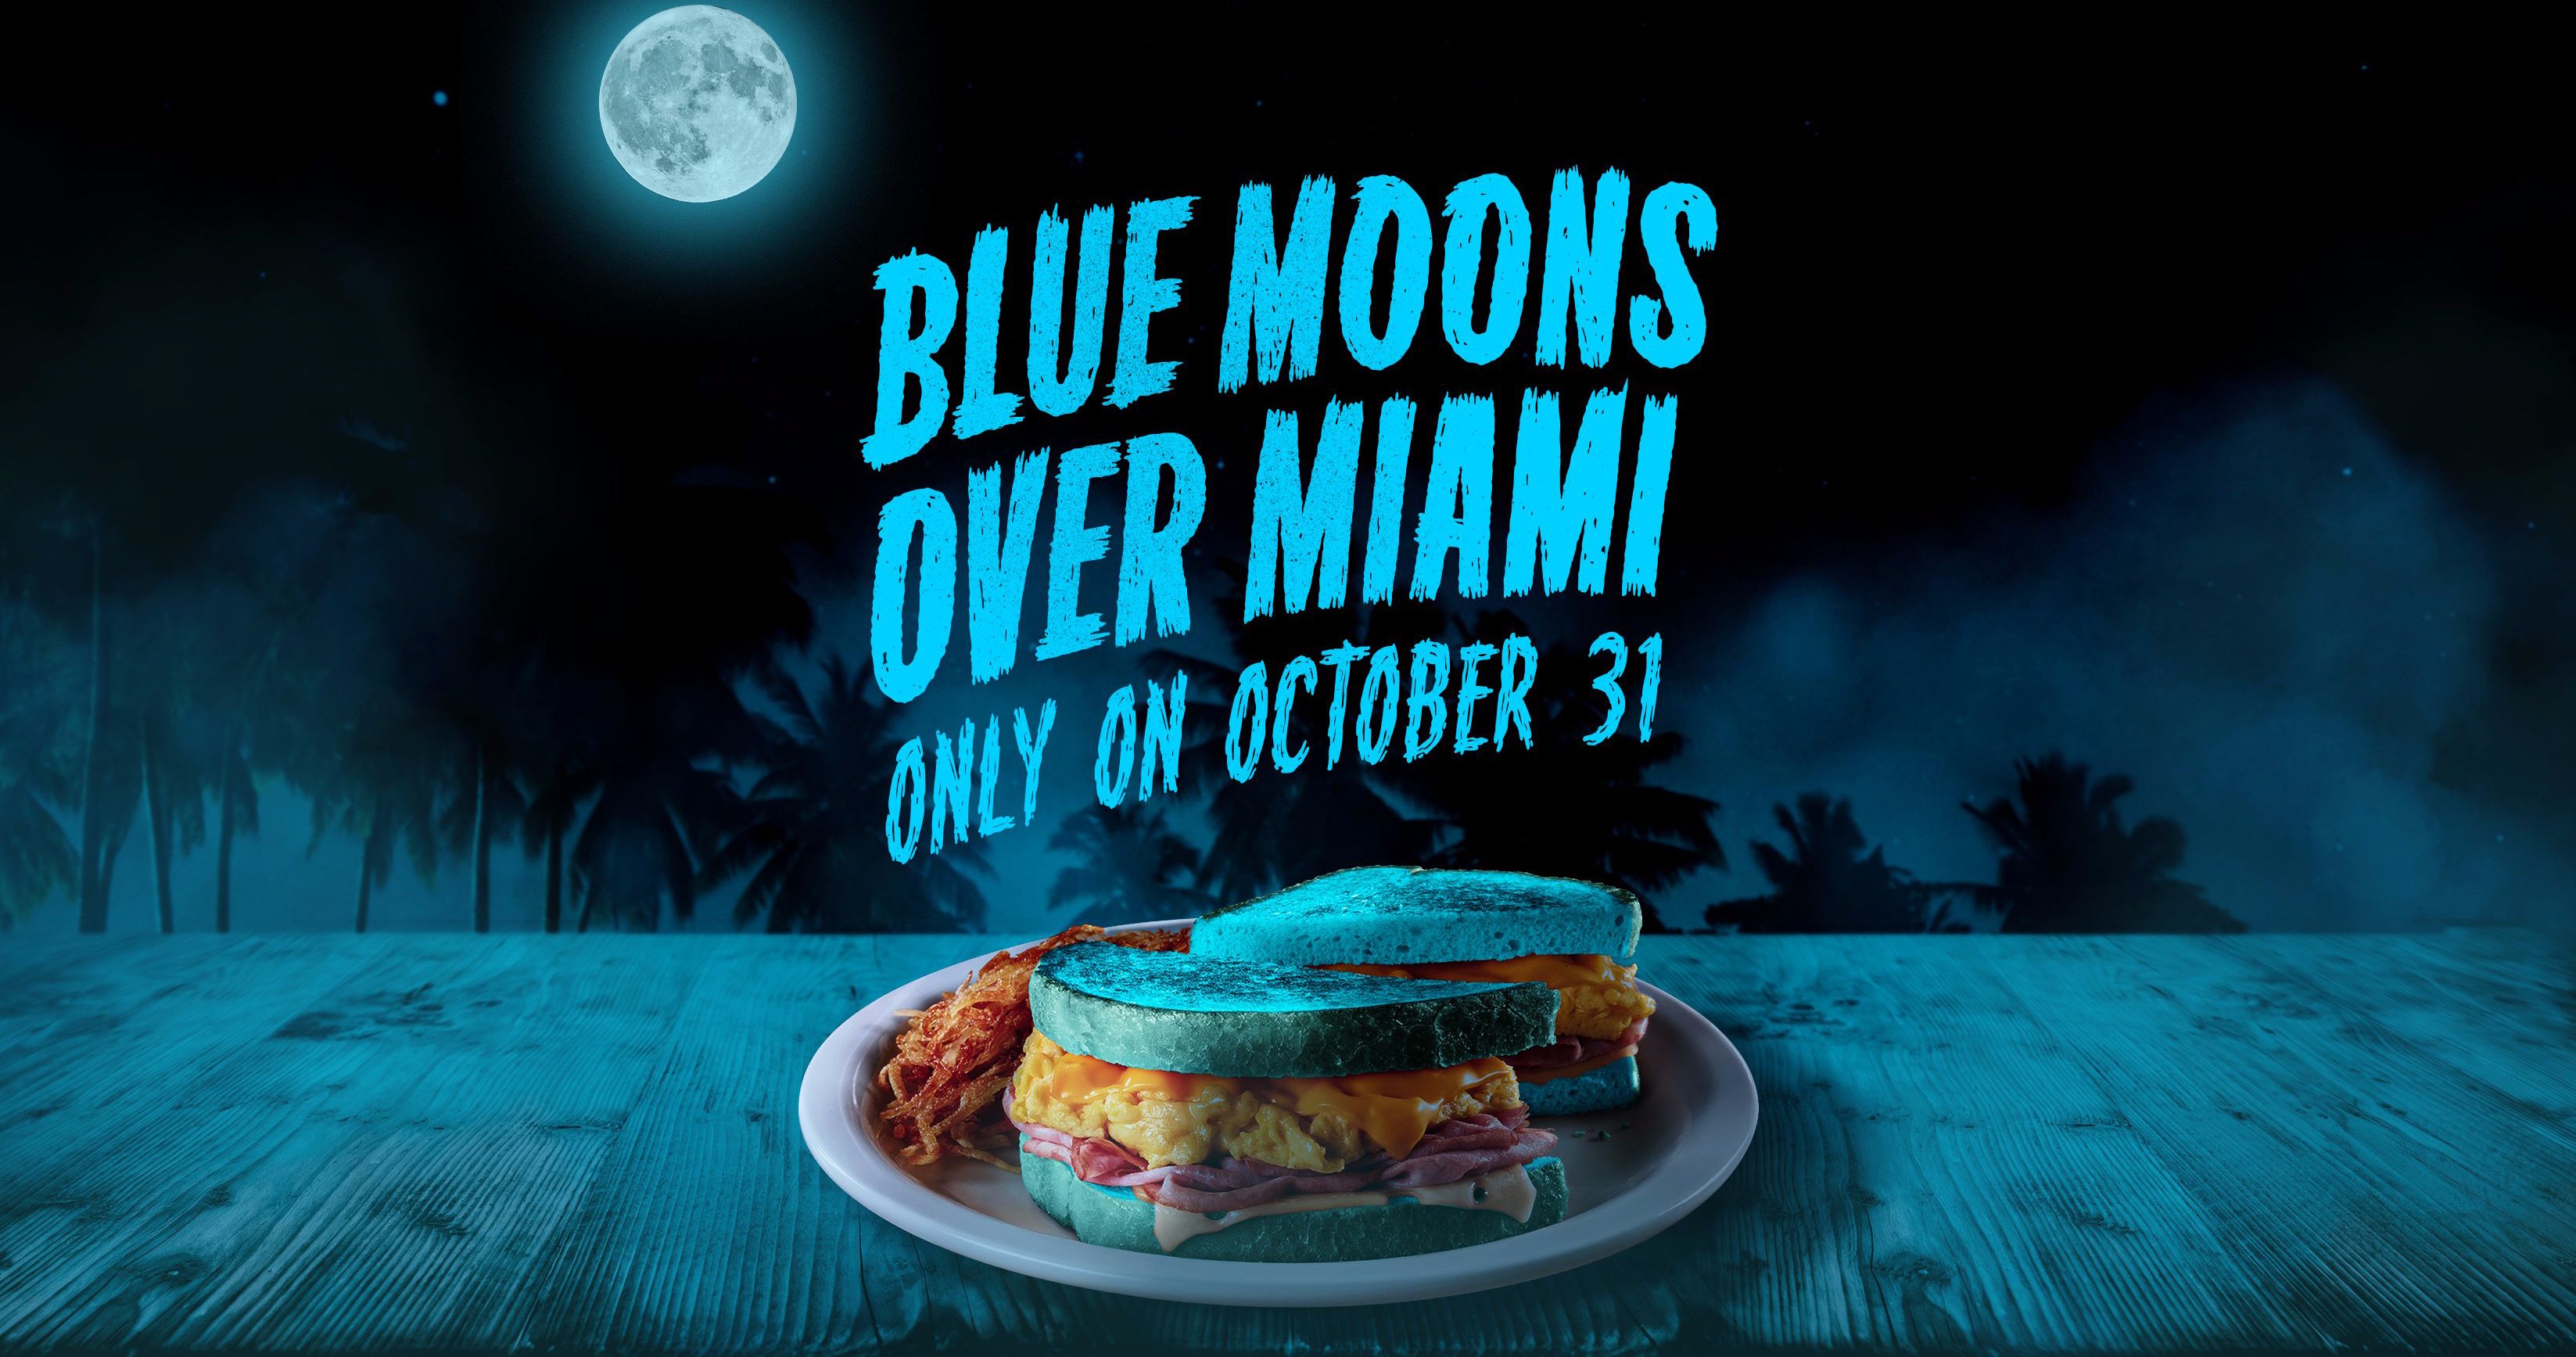 Denny's Blue Moons Over My Hammy Puts a Spooky Twist on Breakfast This Halloween